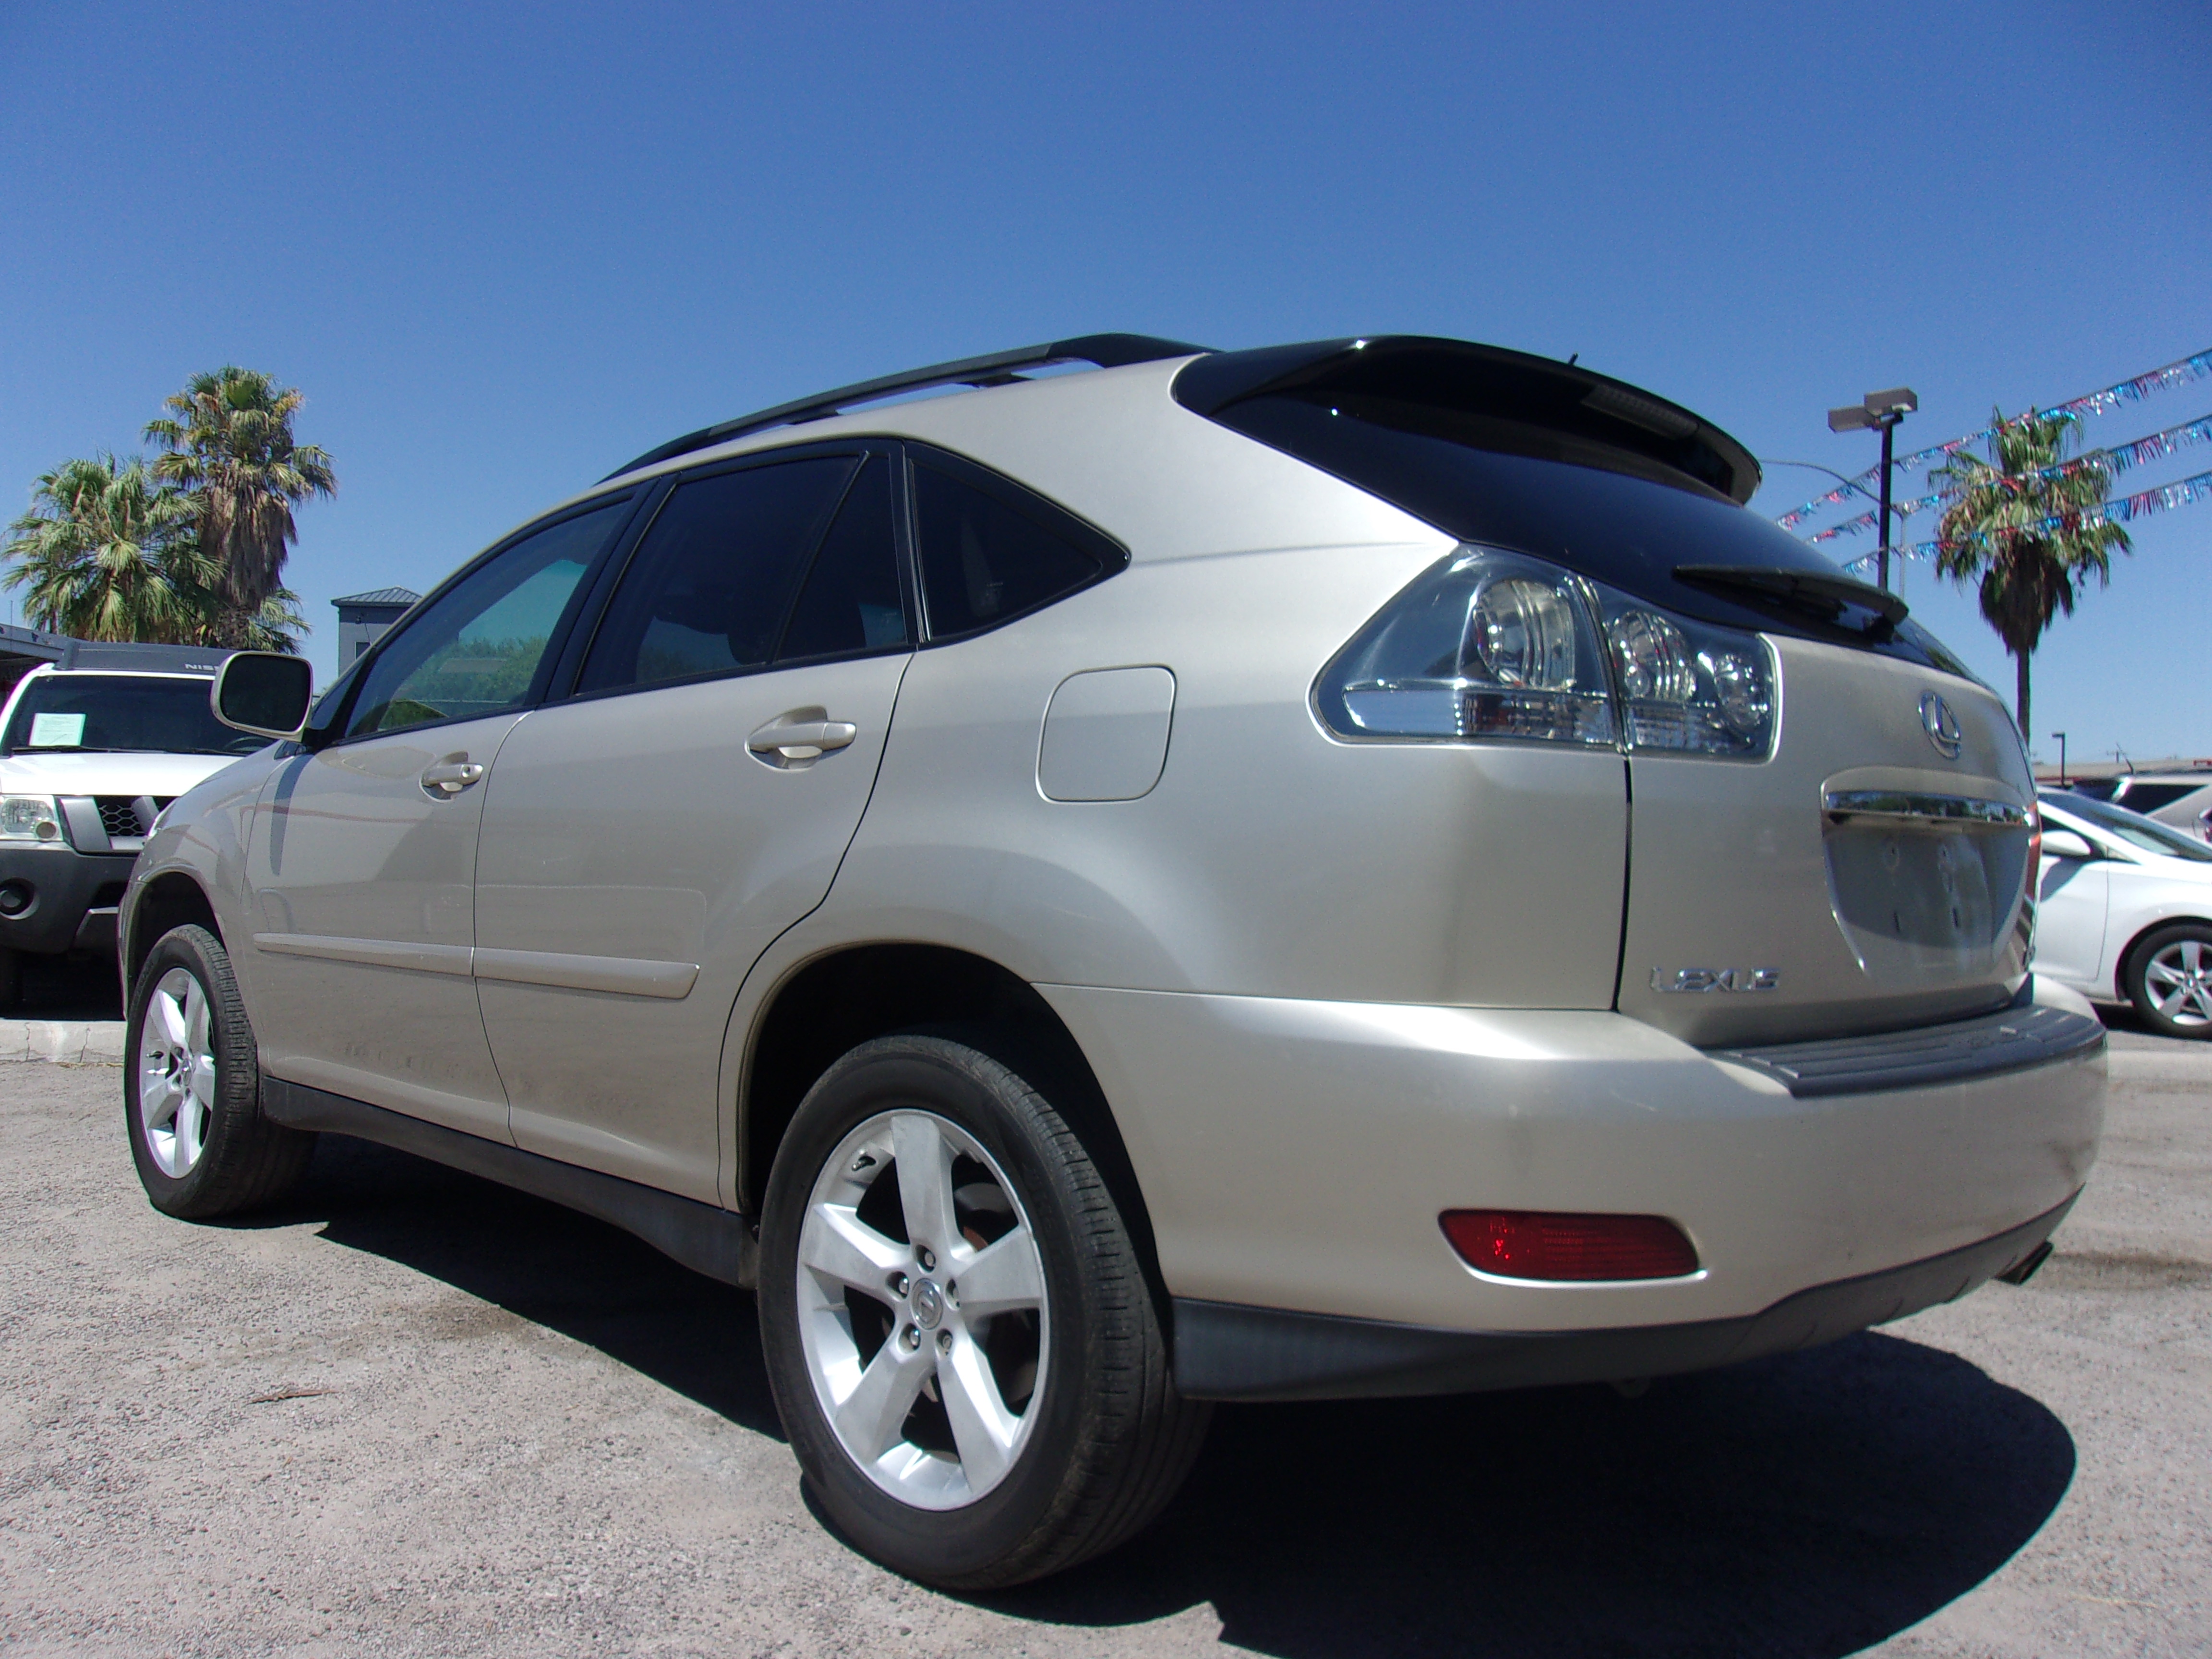 PreOwned 2004 LEXUS RX 330 Sport Utility in Tucson S7596